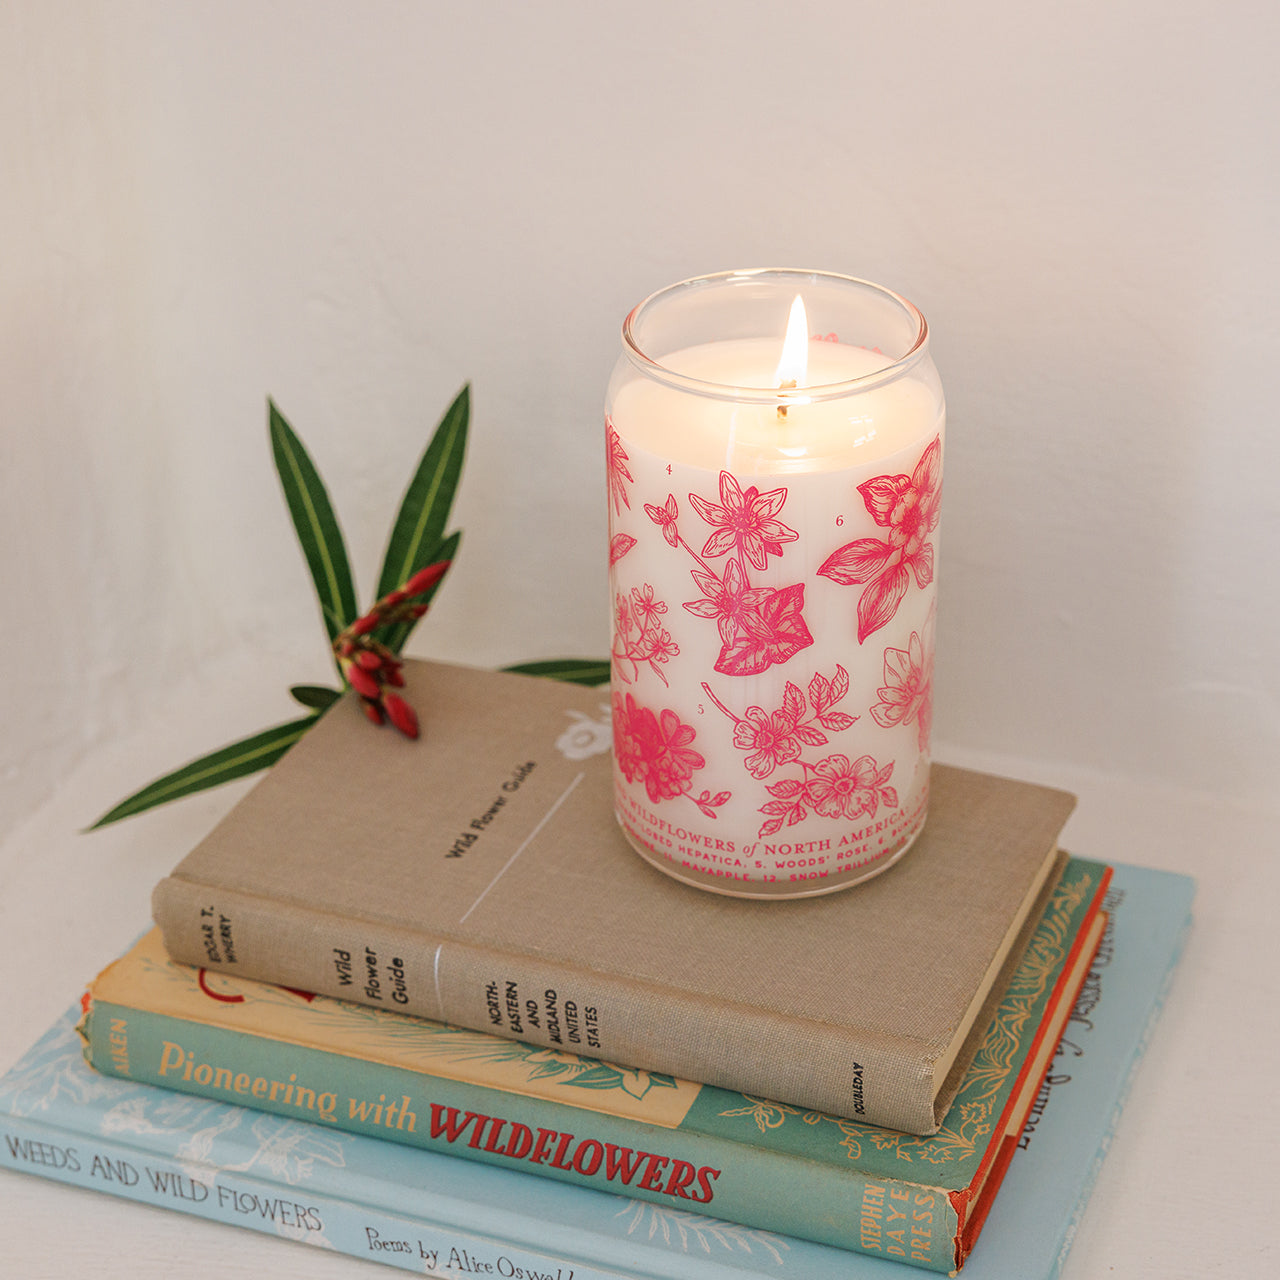 Woodland Wildflowers Soy Candle